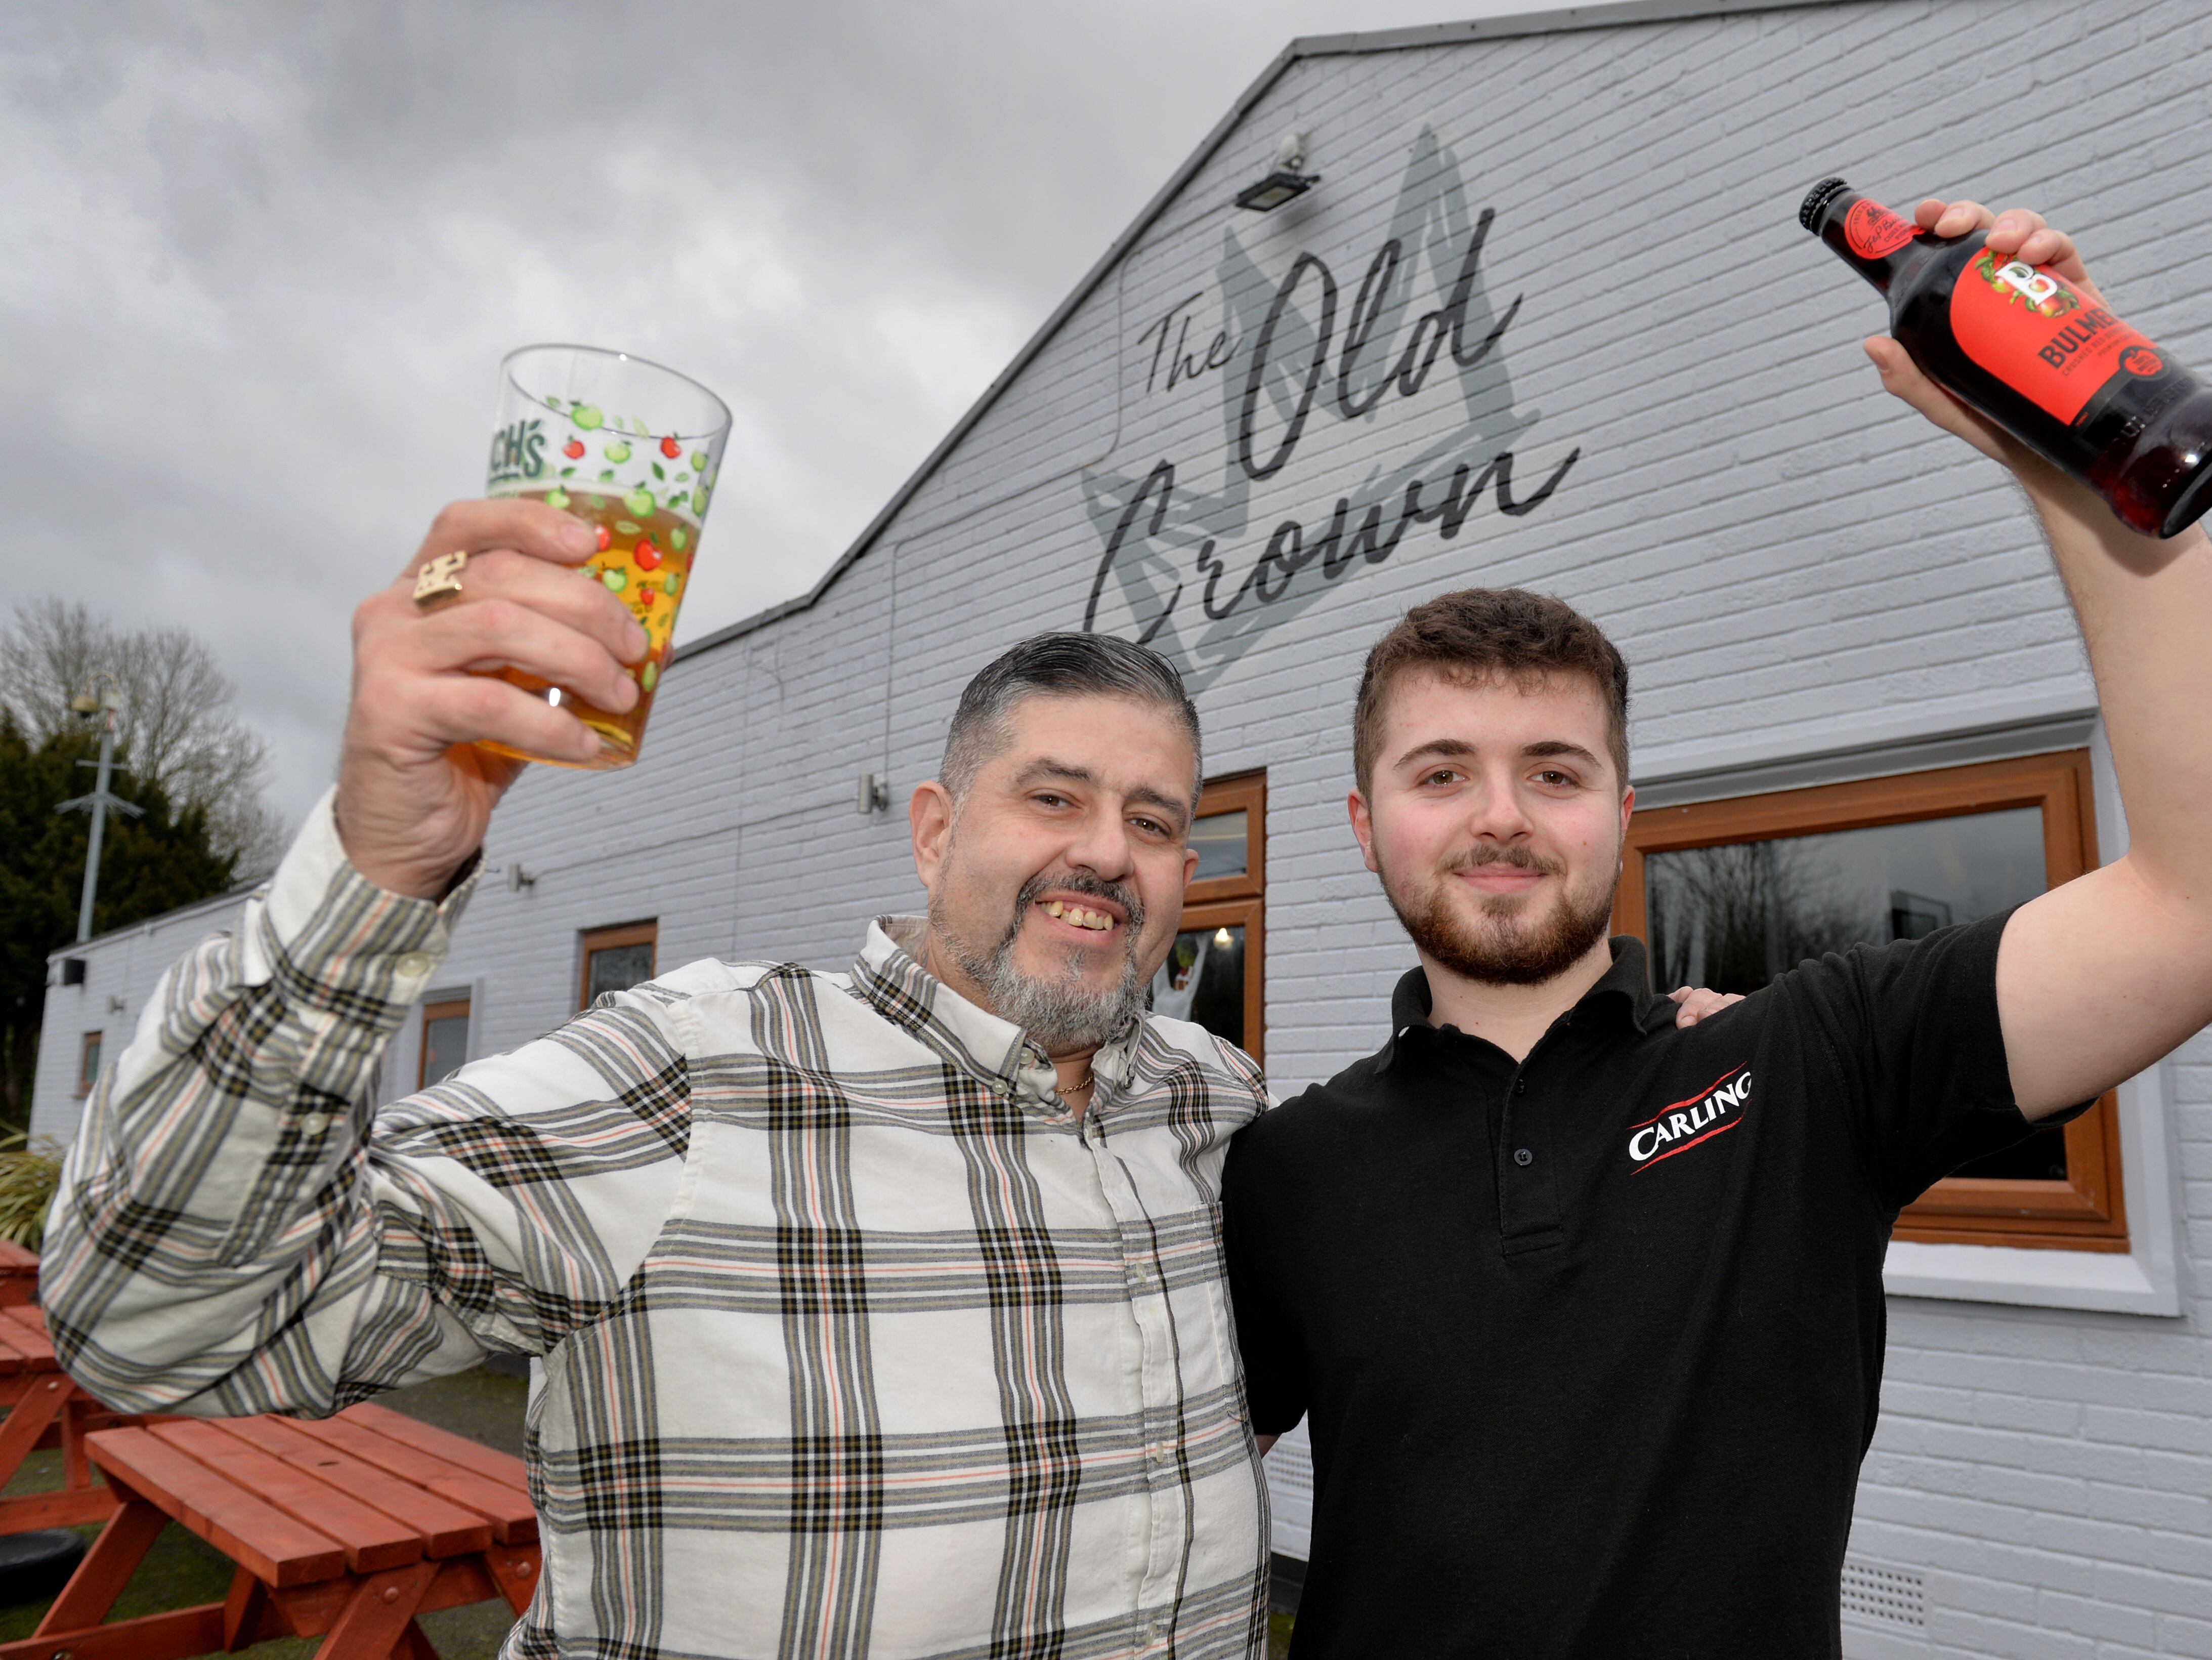 Pubs toast welcome uplift in trade after tough Covid years